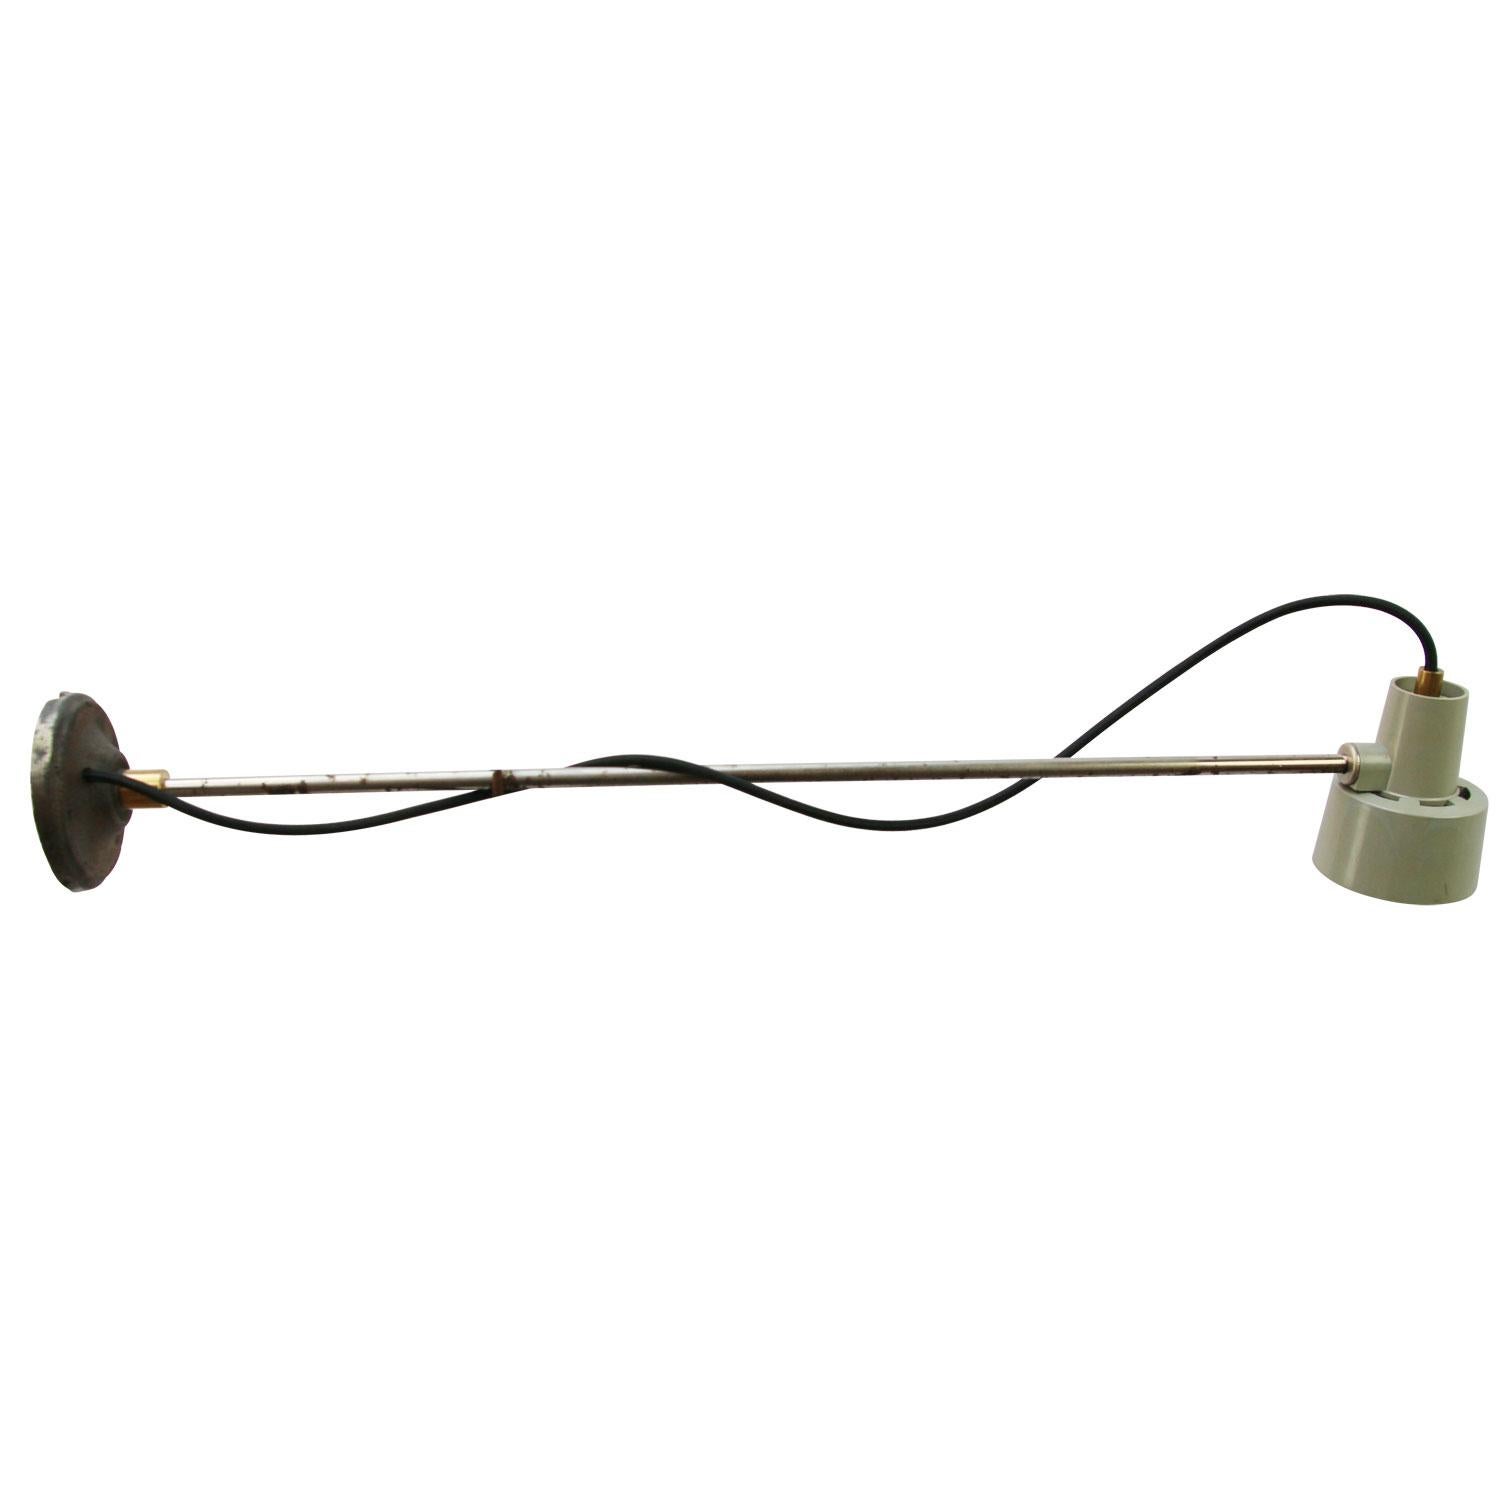 Wall light spot.
Grey shade.
Adjustable in angle.

Diameter cast iron wall mount 10 cm.

E14 bulb holder

Weight: 0.98 kg / 2.2 lb

E14 bulb holder. Priced per individual item. All lamps have been made suitable by international standards for